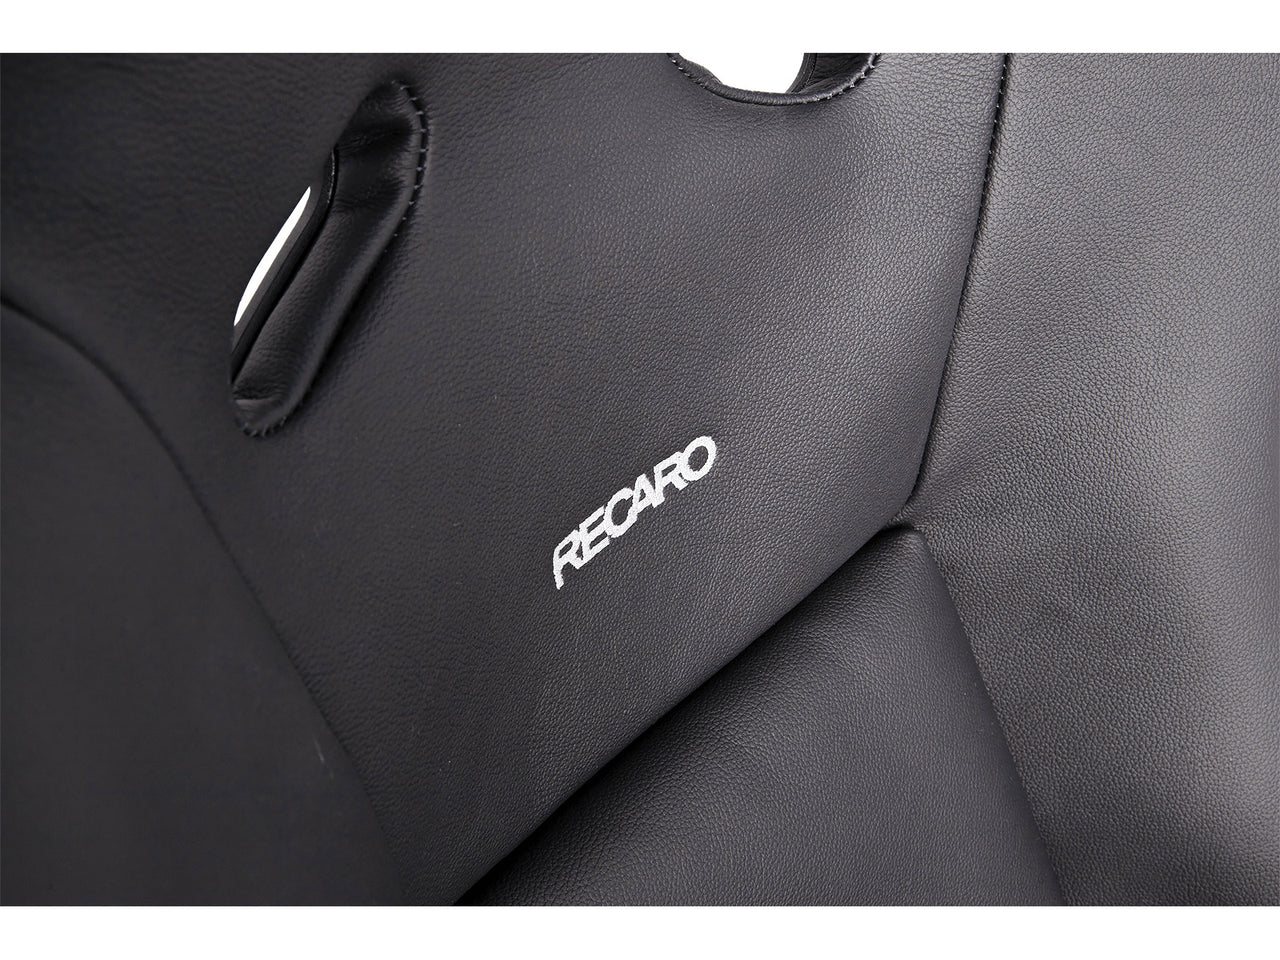 RECARO POLE POSITION N.G.: SUEDE RED, JERSEY RED (SILVER LOGO)